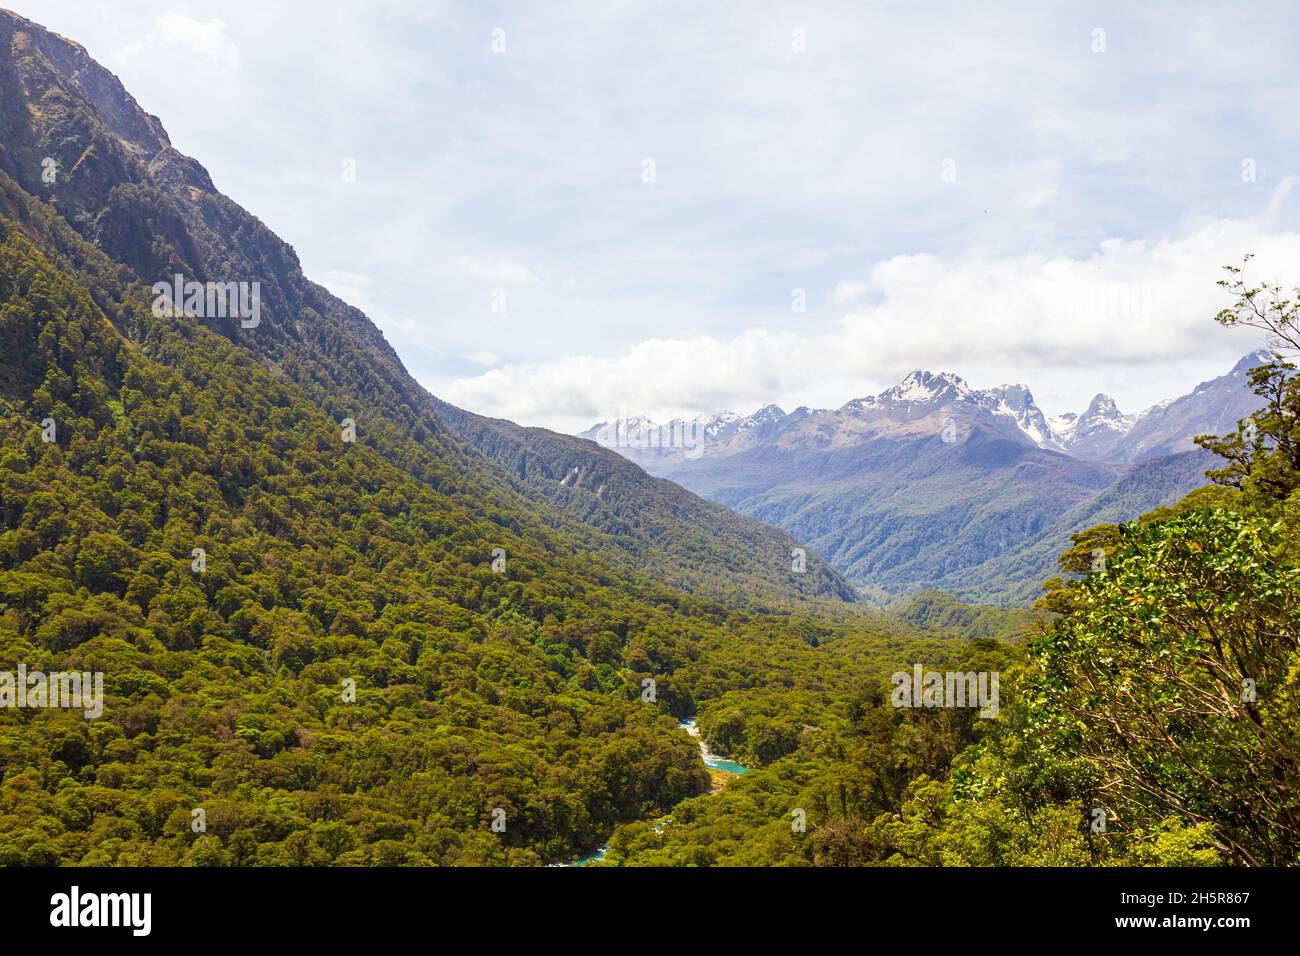 View from the observation deck. Fiordland National Park, South Island, New Zealand Stock Photo